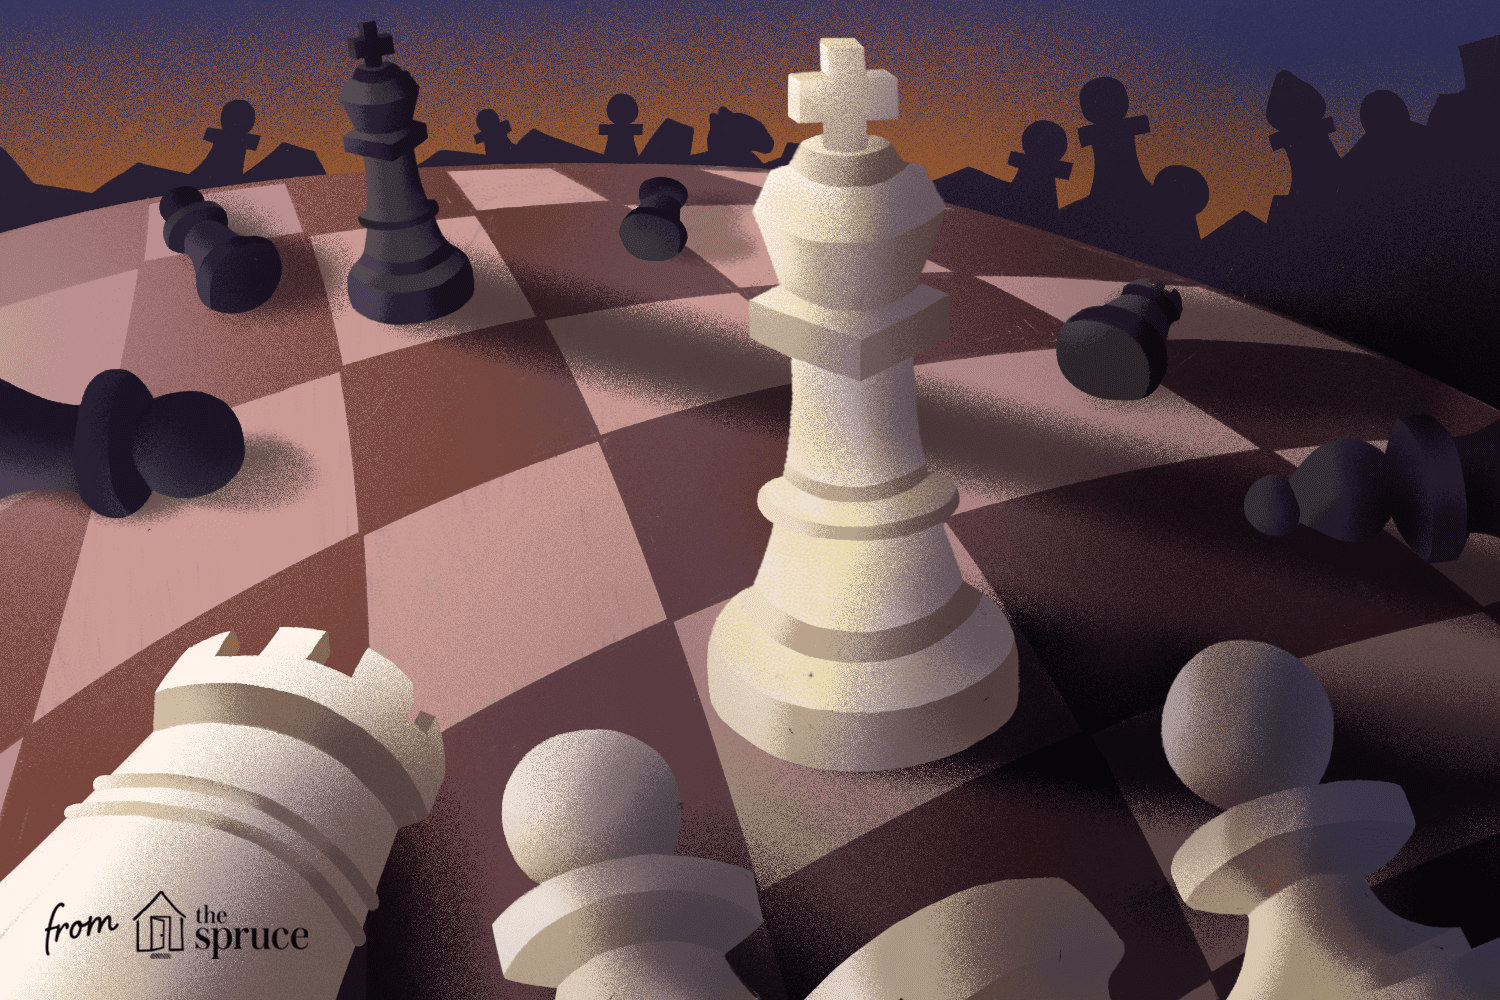 Illustration of chess pieces fallen down